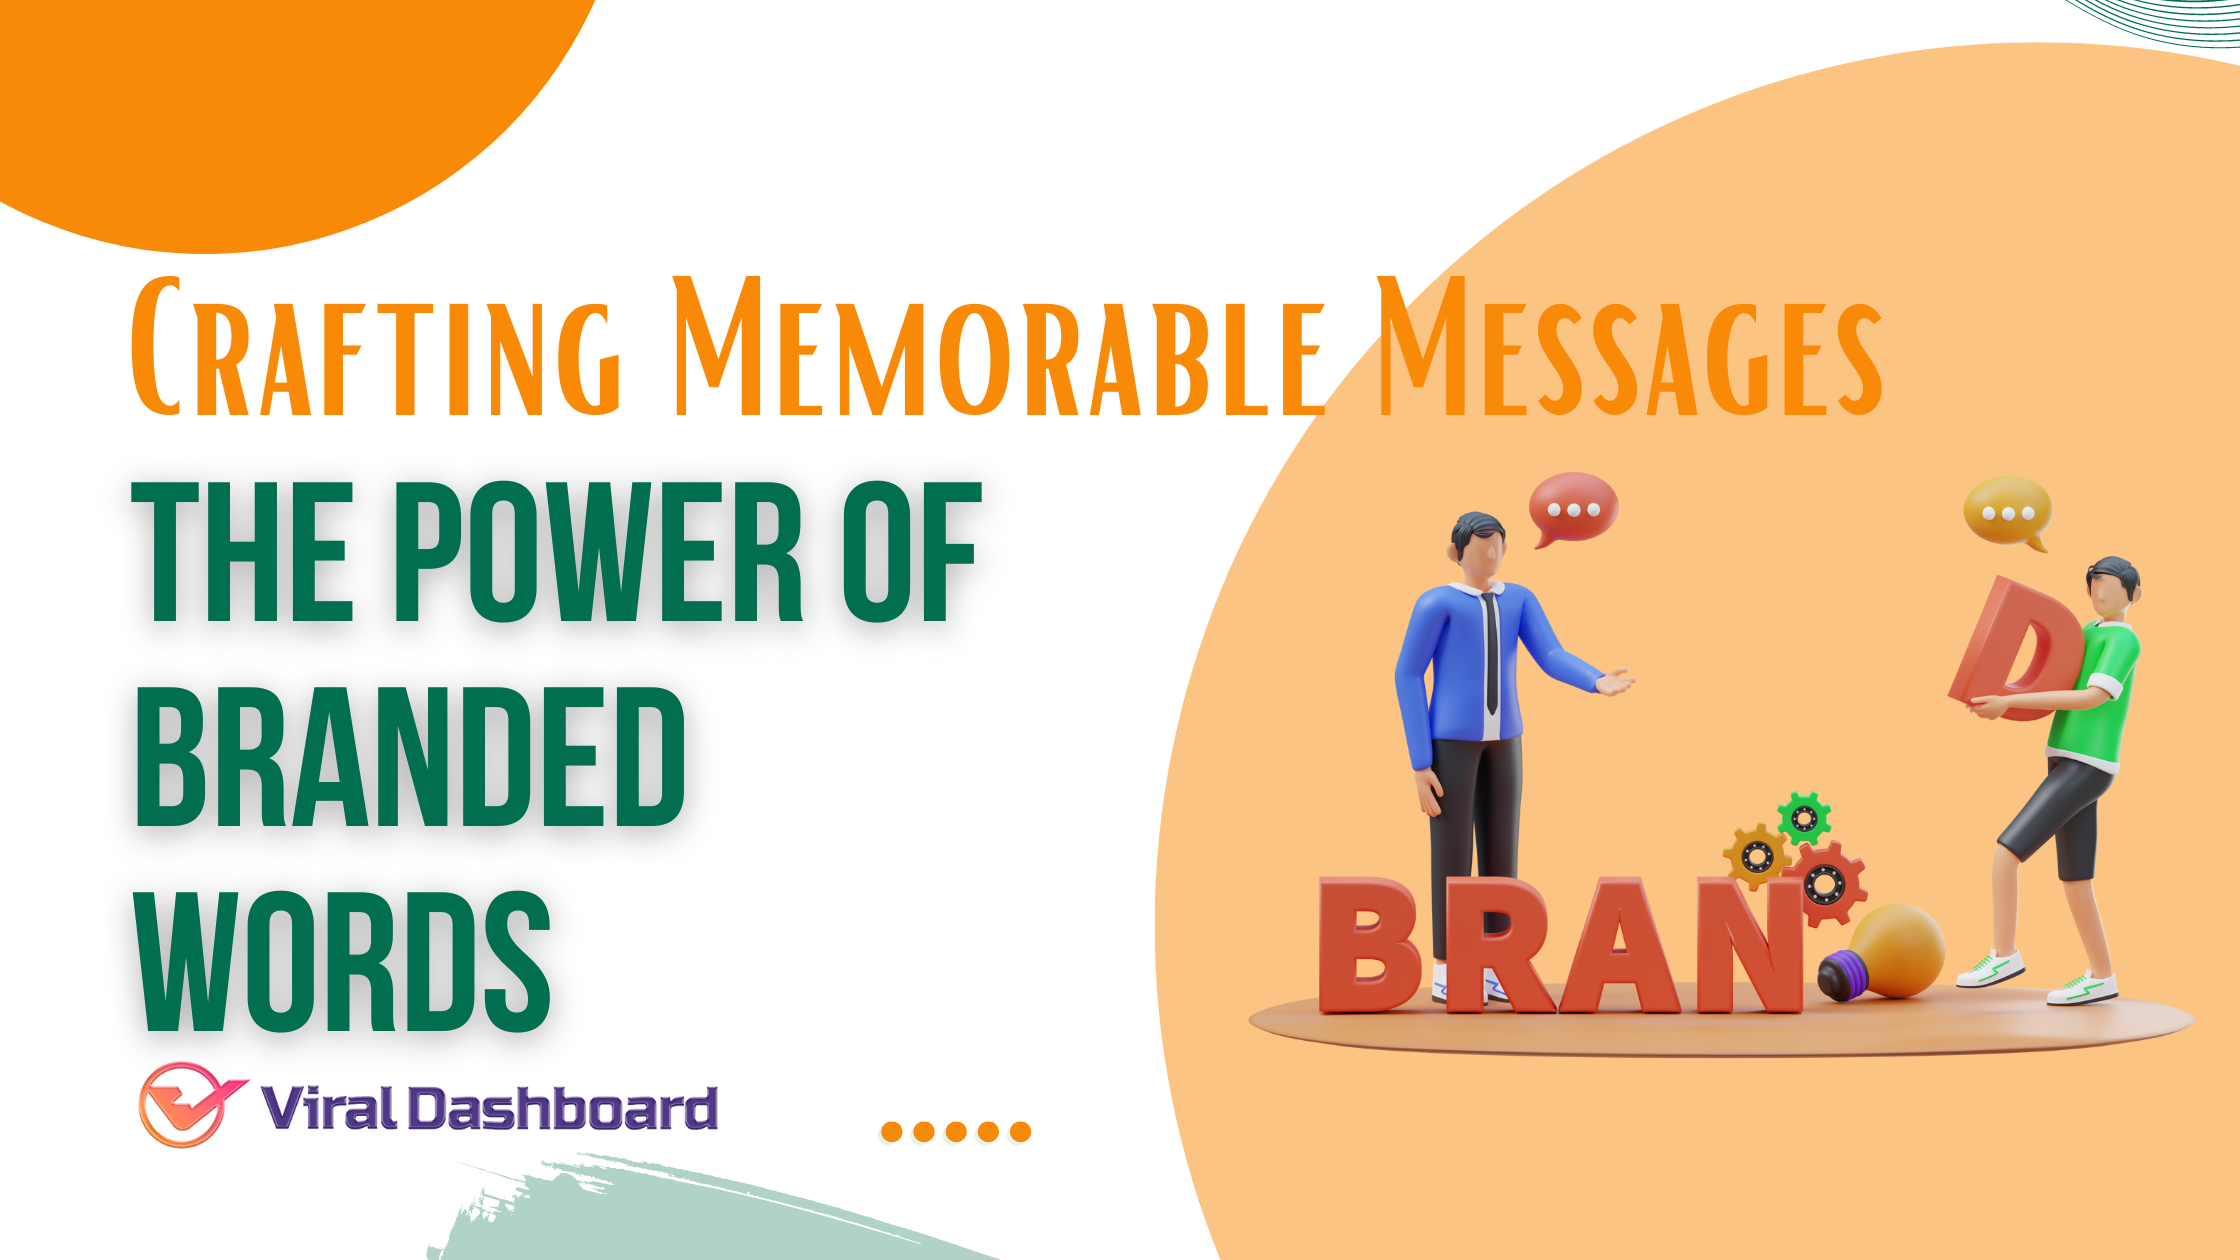 Crafting Memorable Messages: The Power of Branded Words